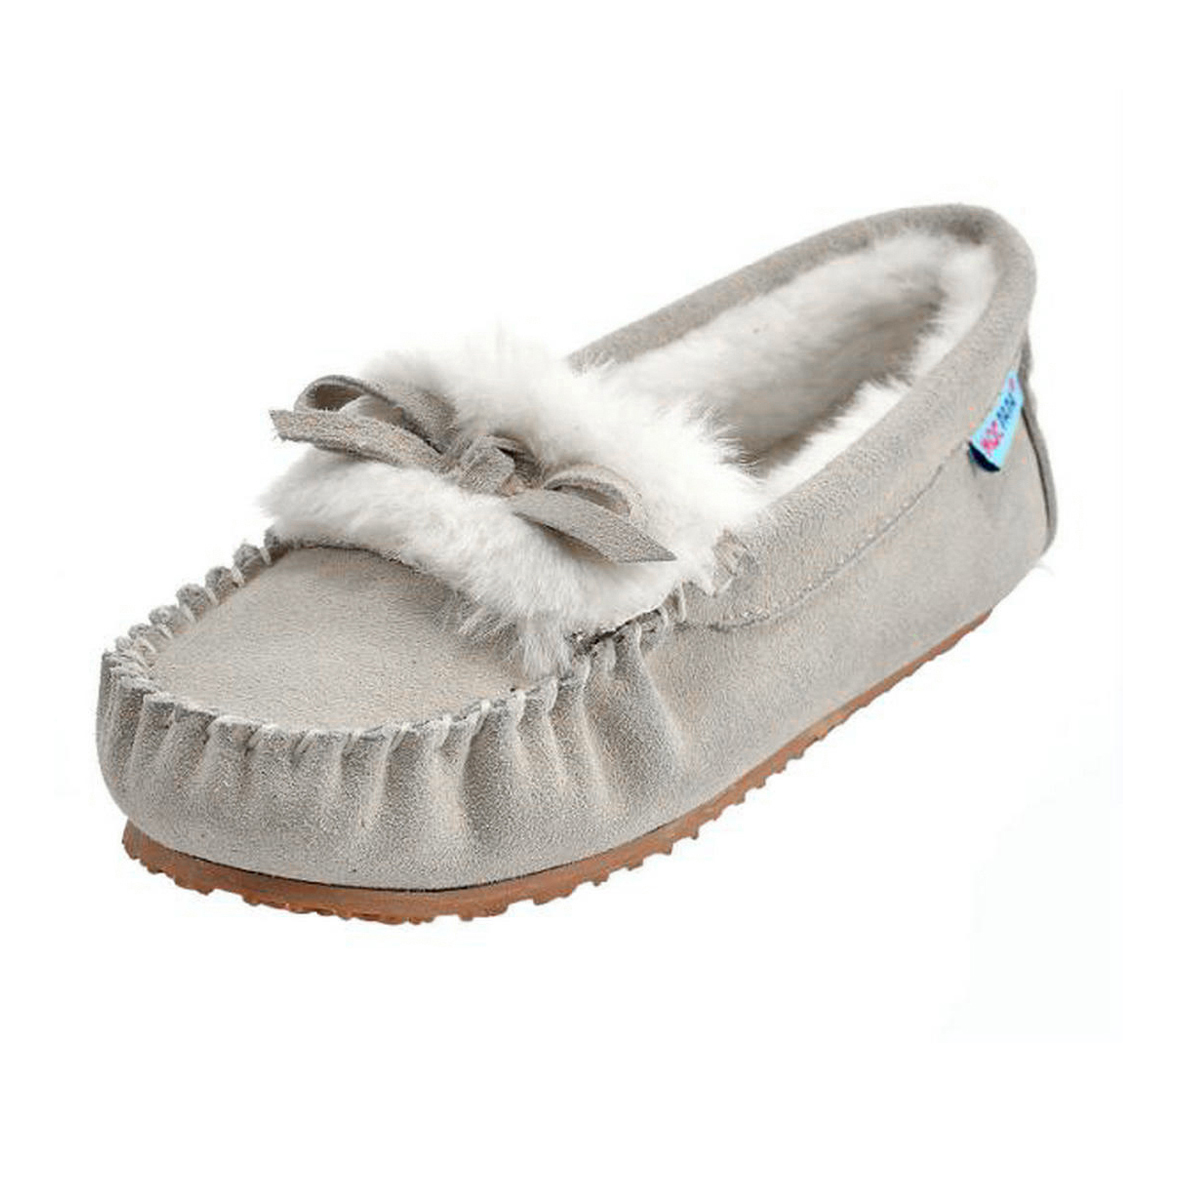 Children's Kids' Leather Moccasin Slippers